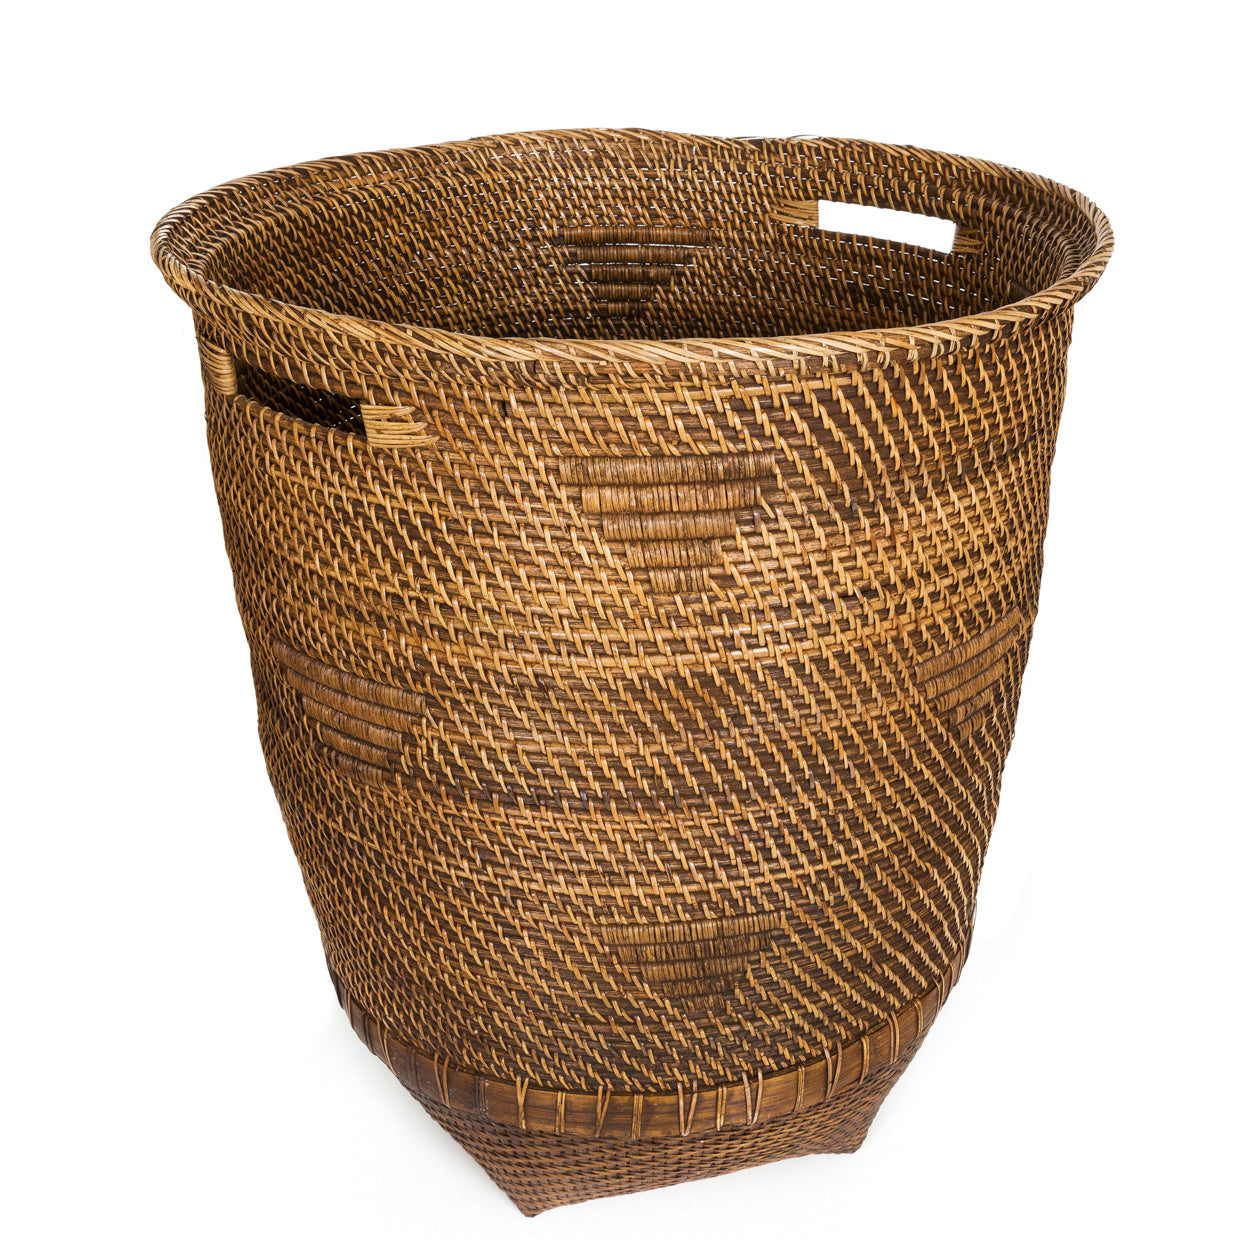 THE COLONIAL Laundry Basket without lid